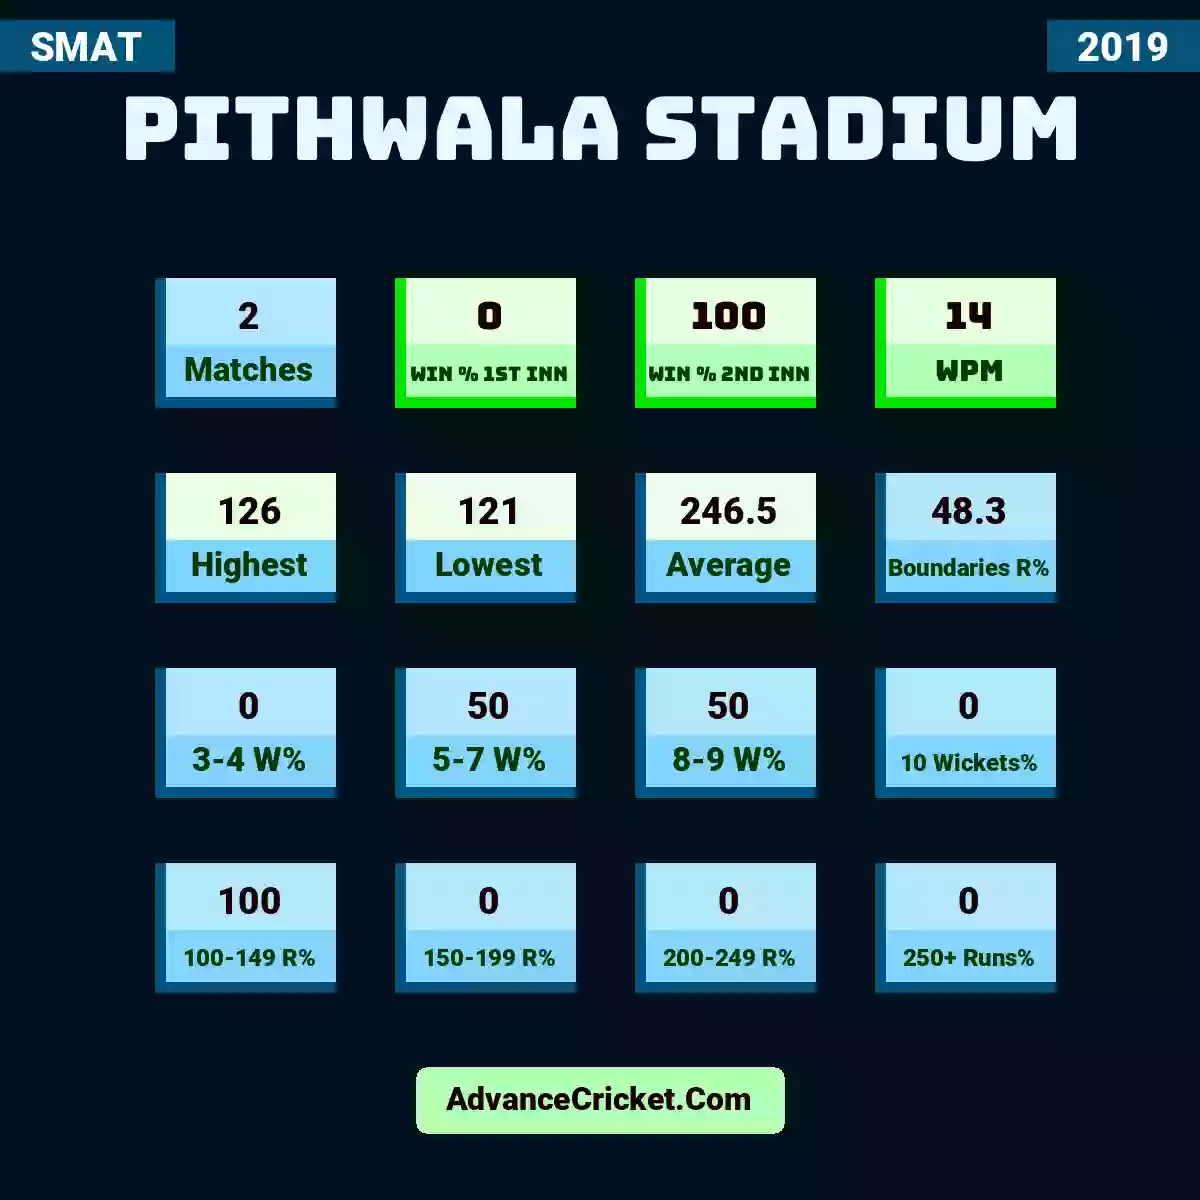 Image showing Pithwala Stadium with Matches: 2, Win % 1st Inn: 0, Win % 2nd Inn: 100, WPM: 14, Highest: 126, Lowest: 121, Average: 246.5, Boundaries R%: 48.3, 3-4 W%: 0, 5-7 W%: 50, 8-9 W%: 50, 10 Wickets%: 0, 100-149 R%: 100, 150-199 R%: 0, 200-249 R%: 0, 250+ Runs%: 0.